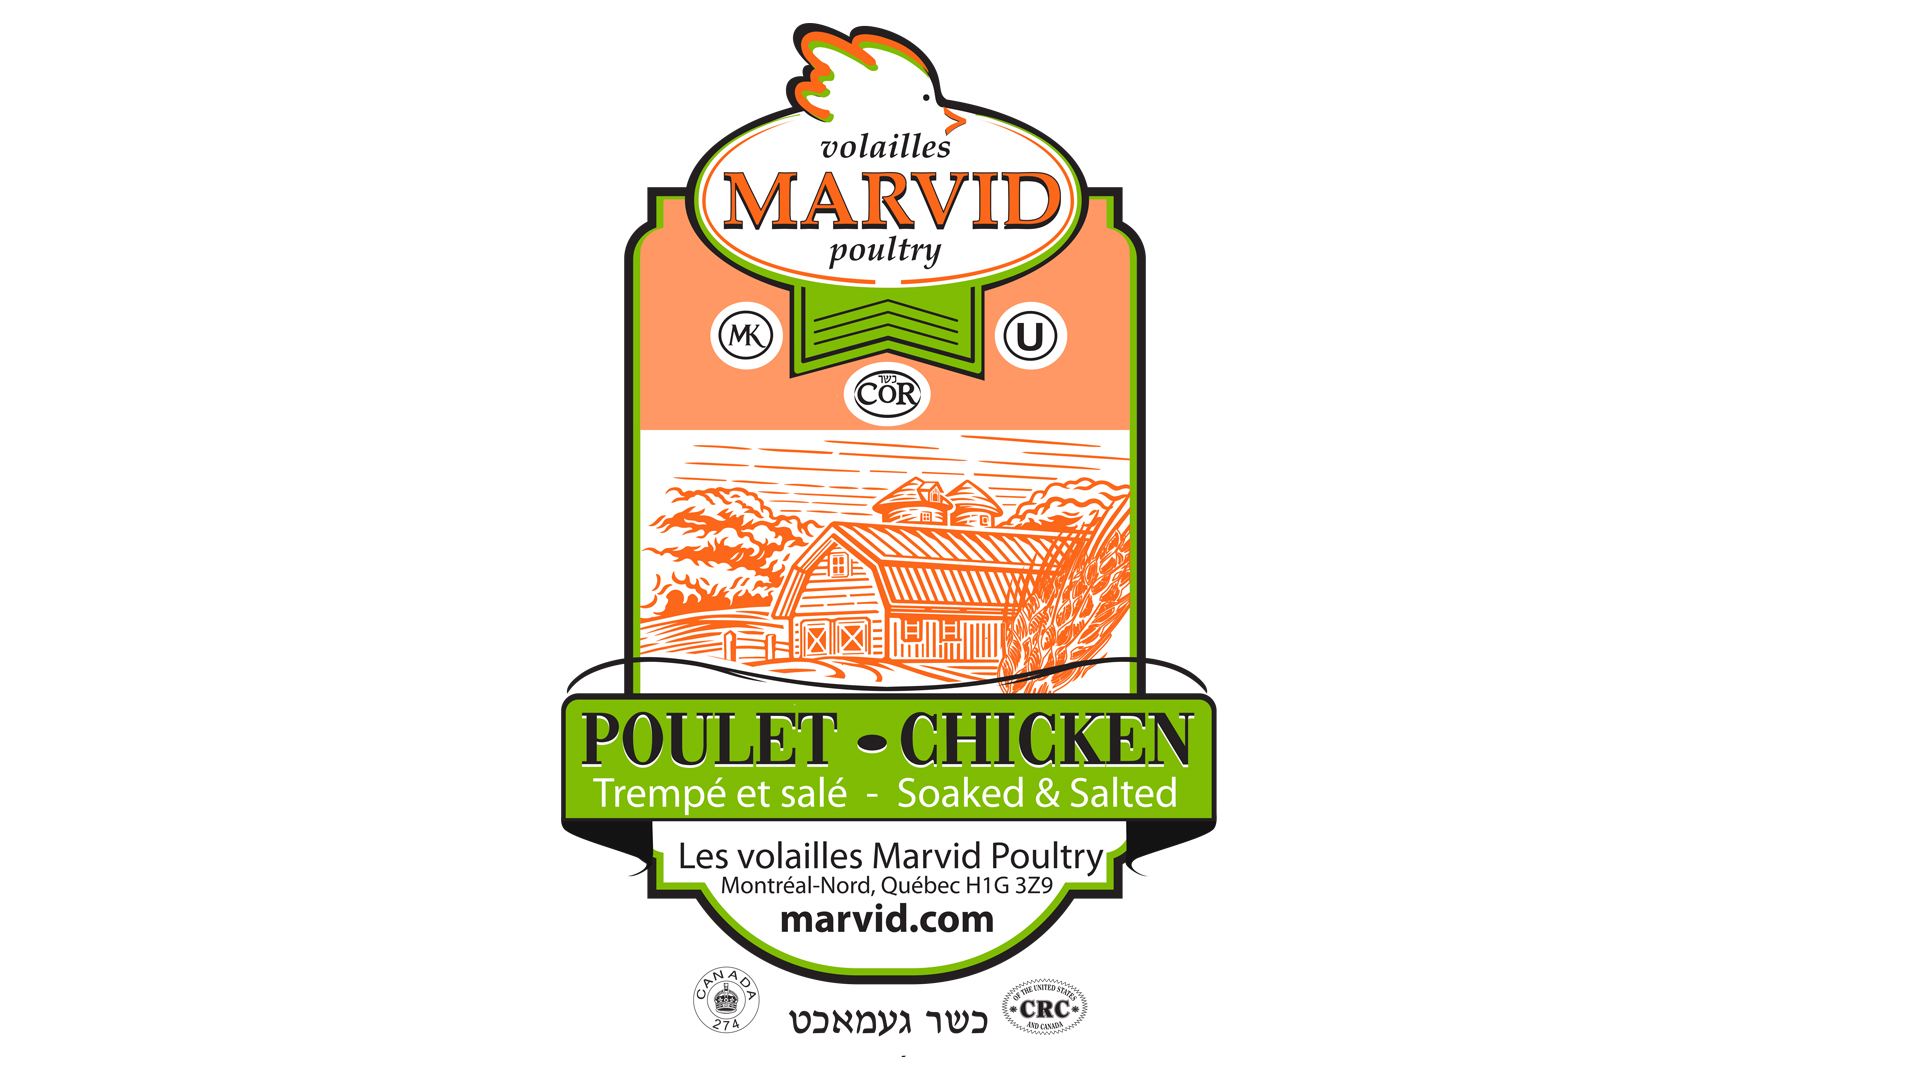 Marvid Poultry